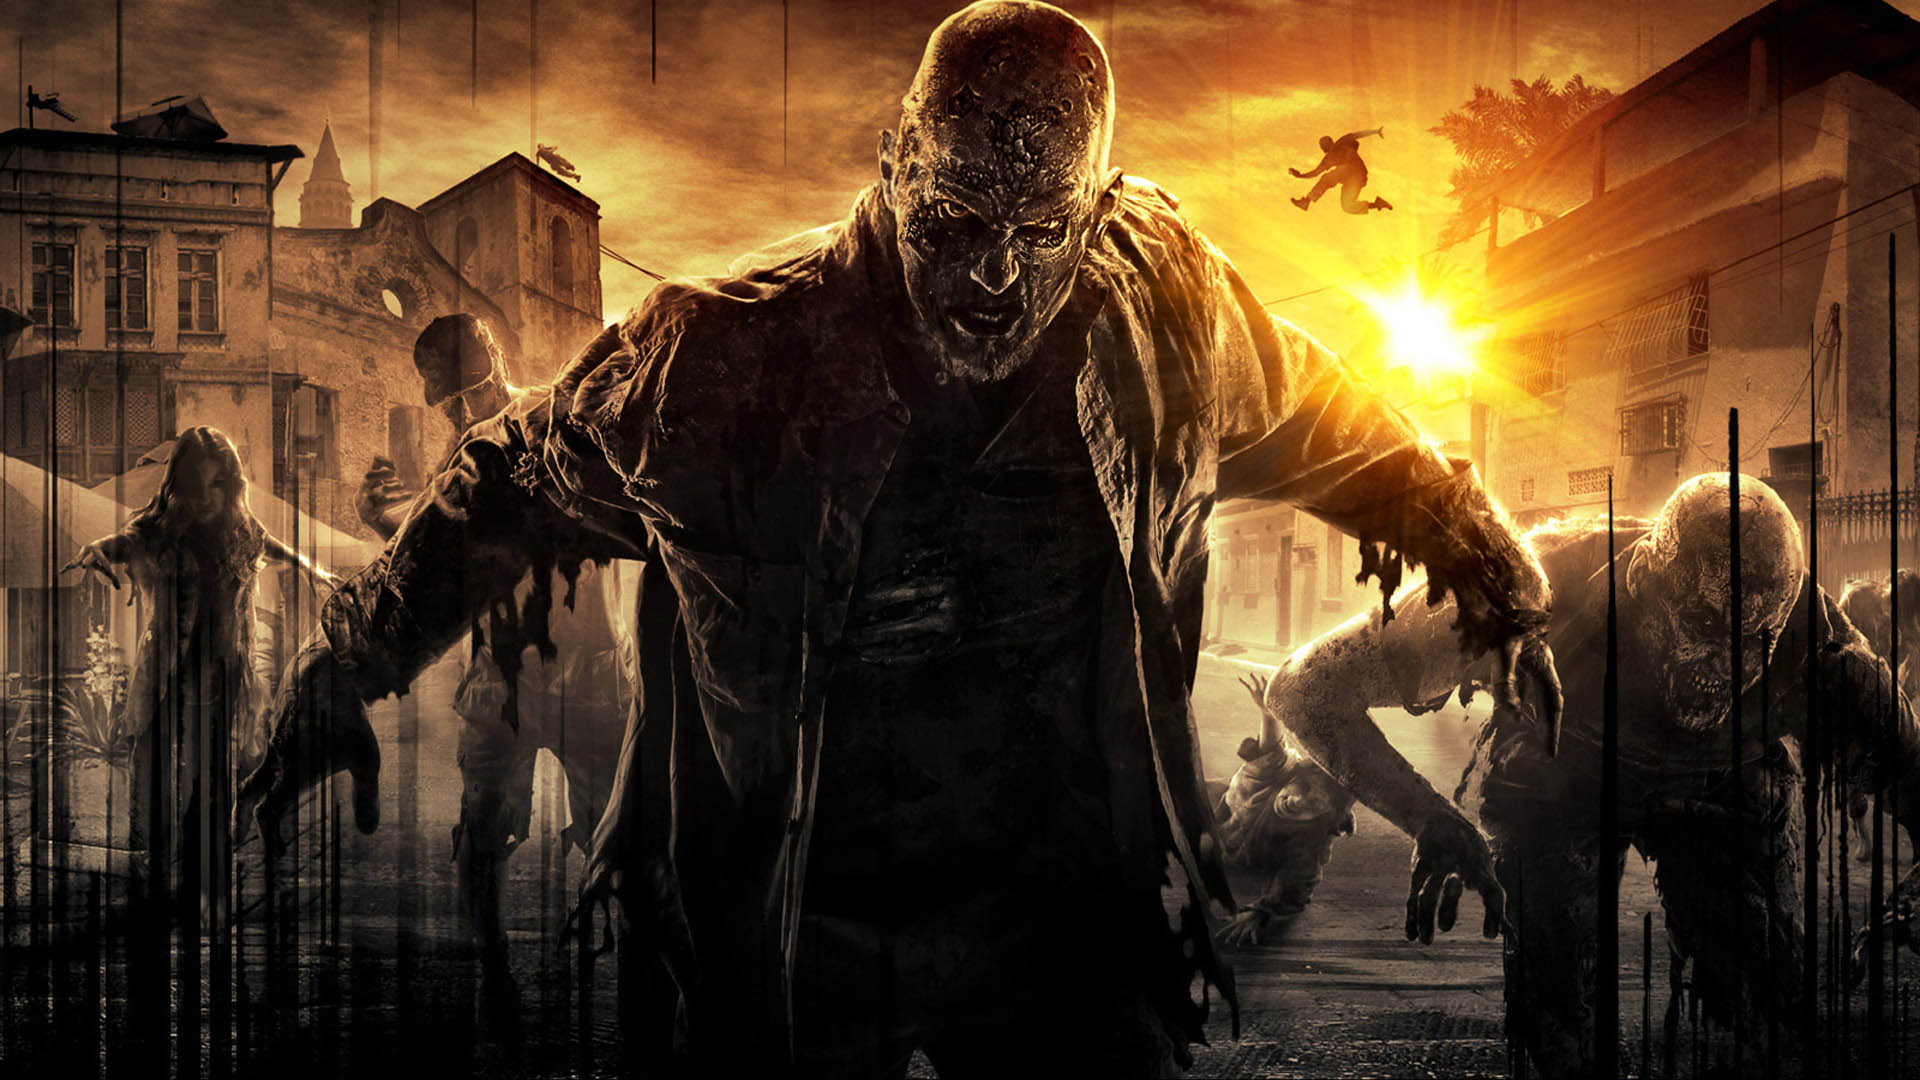 Dying Light - Zombie Attack - 1920x1080 - Full HD 16/9 - Wallpaper ...